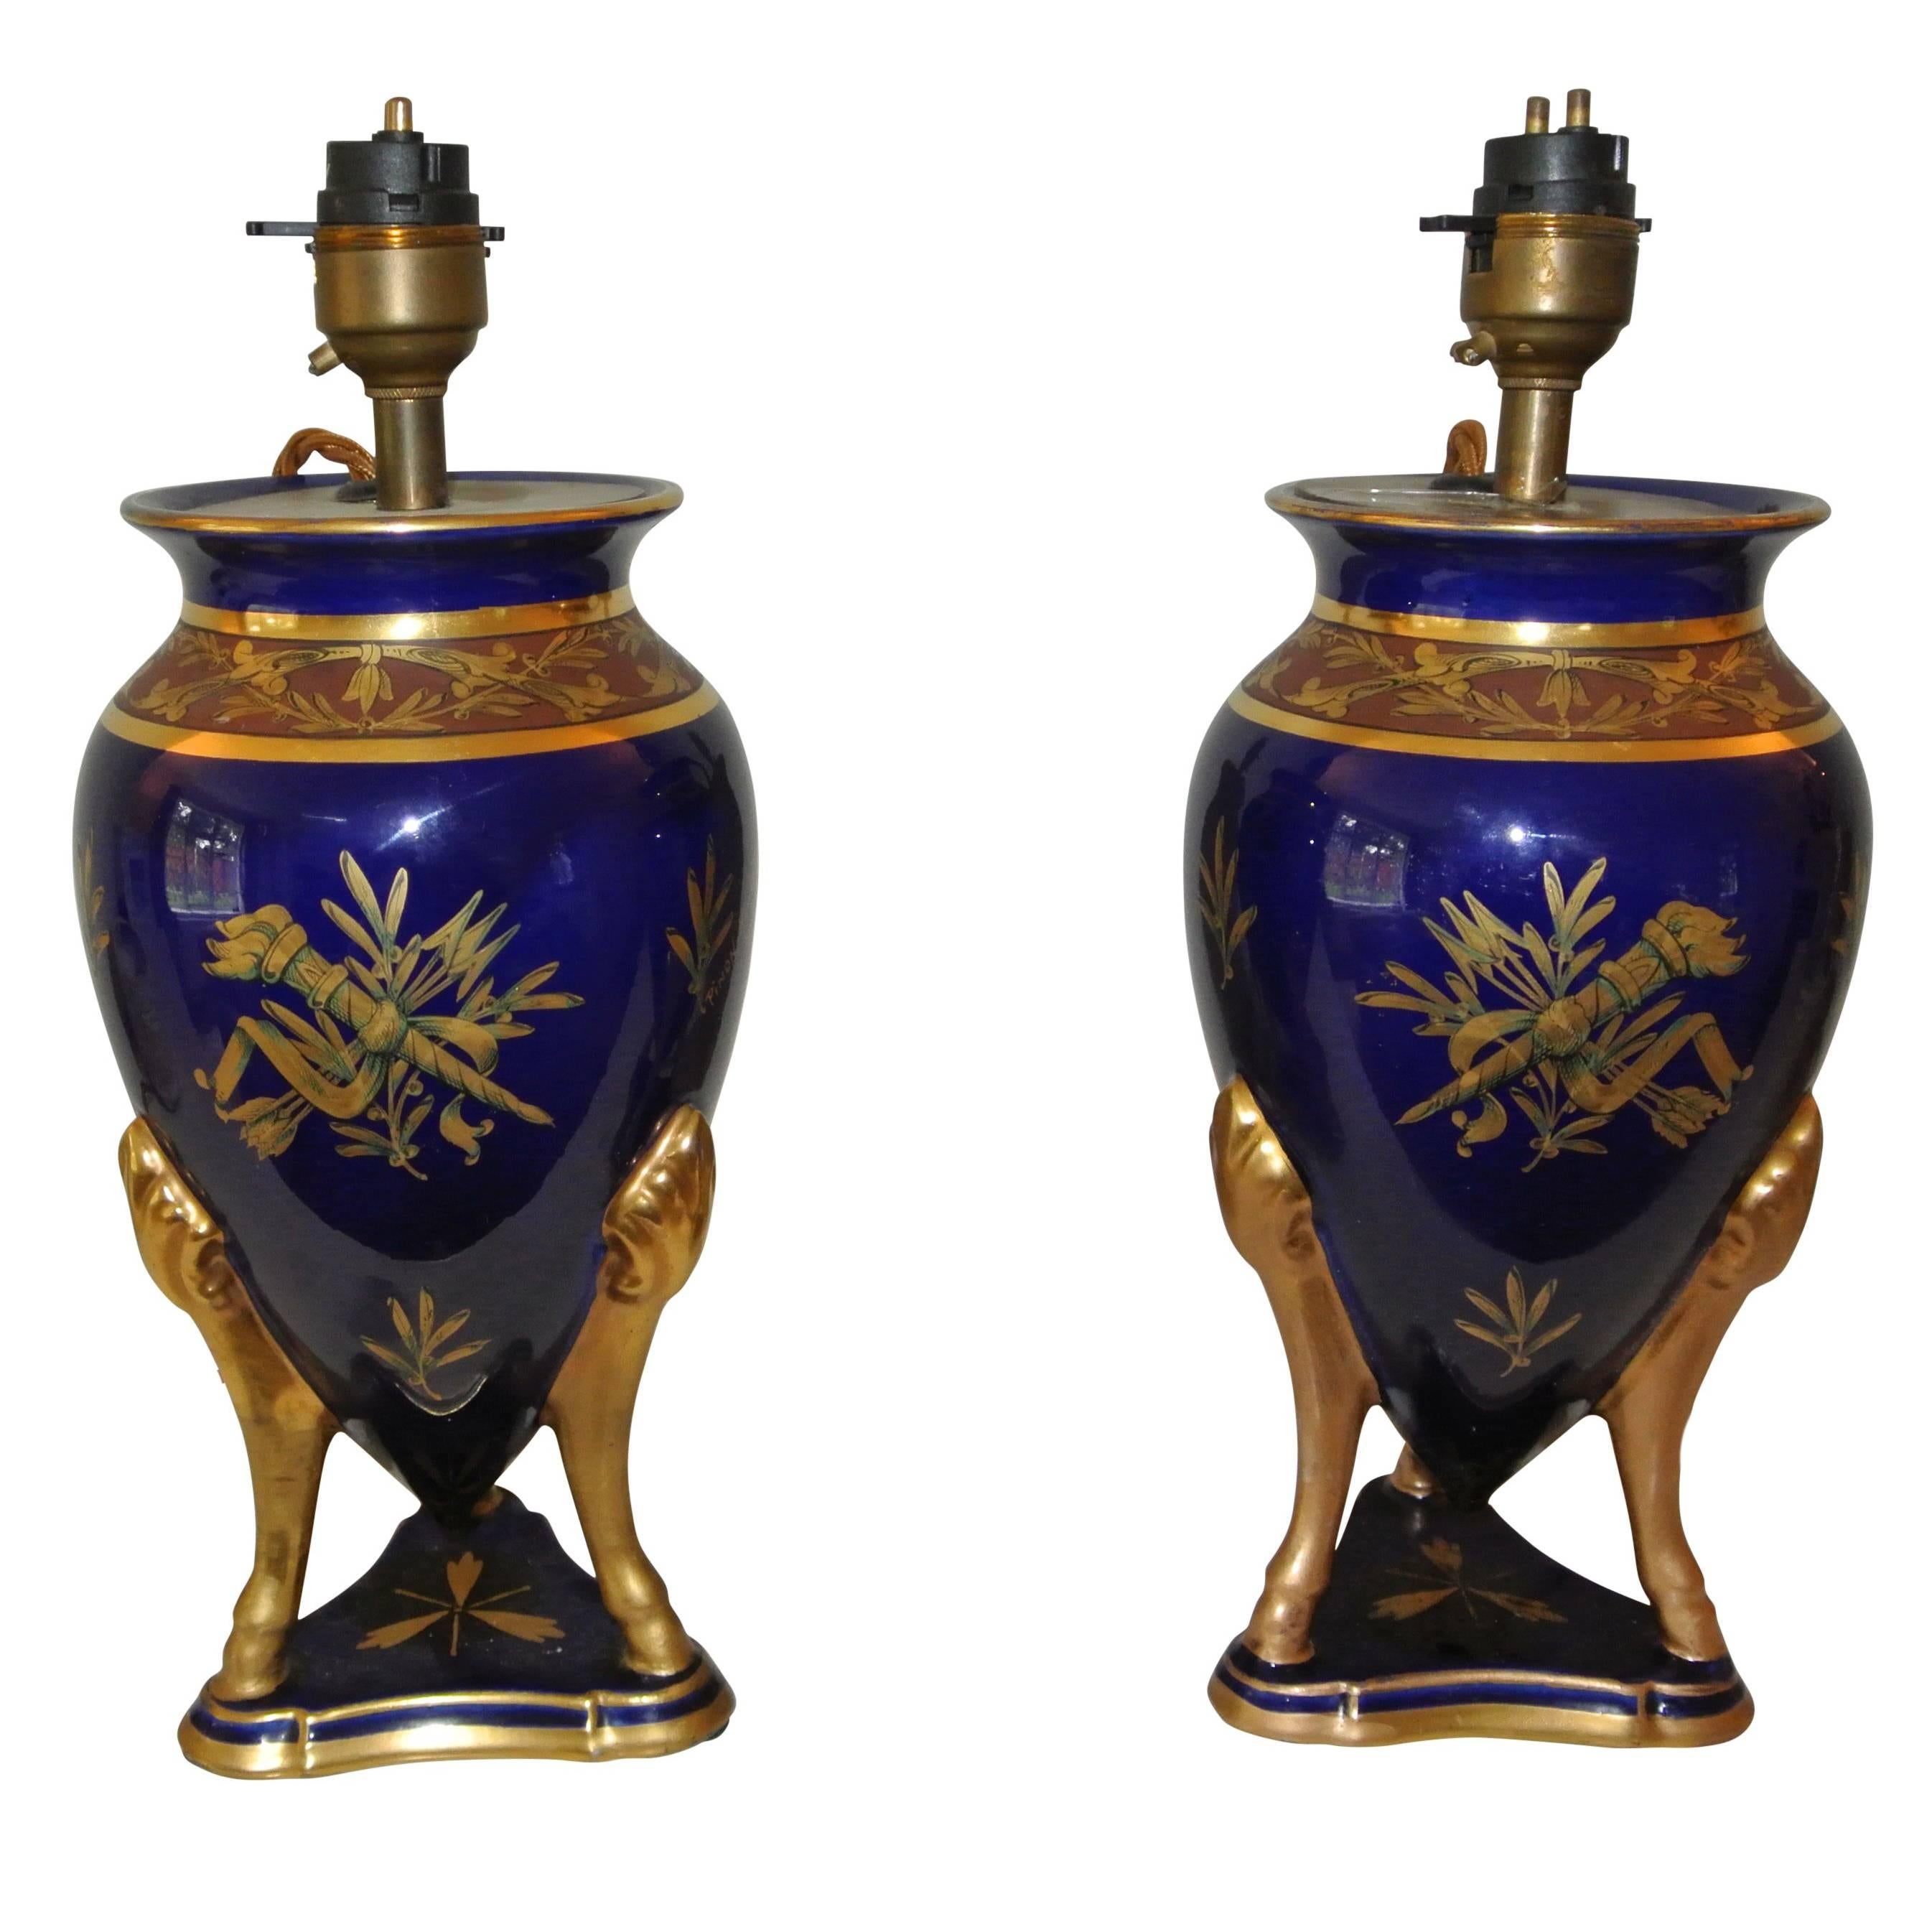 Pair of French Art Deco Faience Vase Lamps